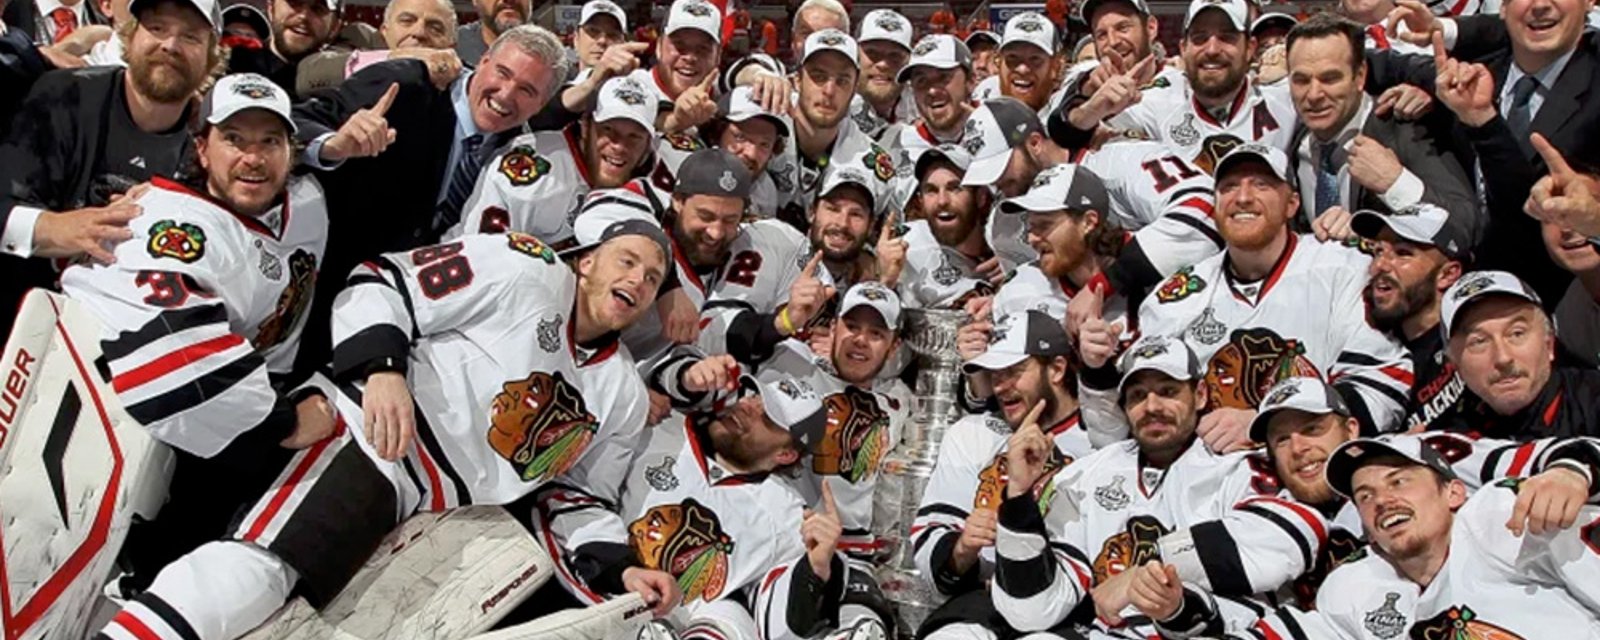 Explosive allegations of sexual assault being made against Chicago Blackhawks 